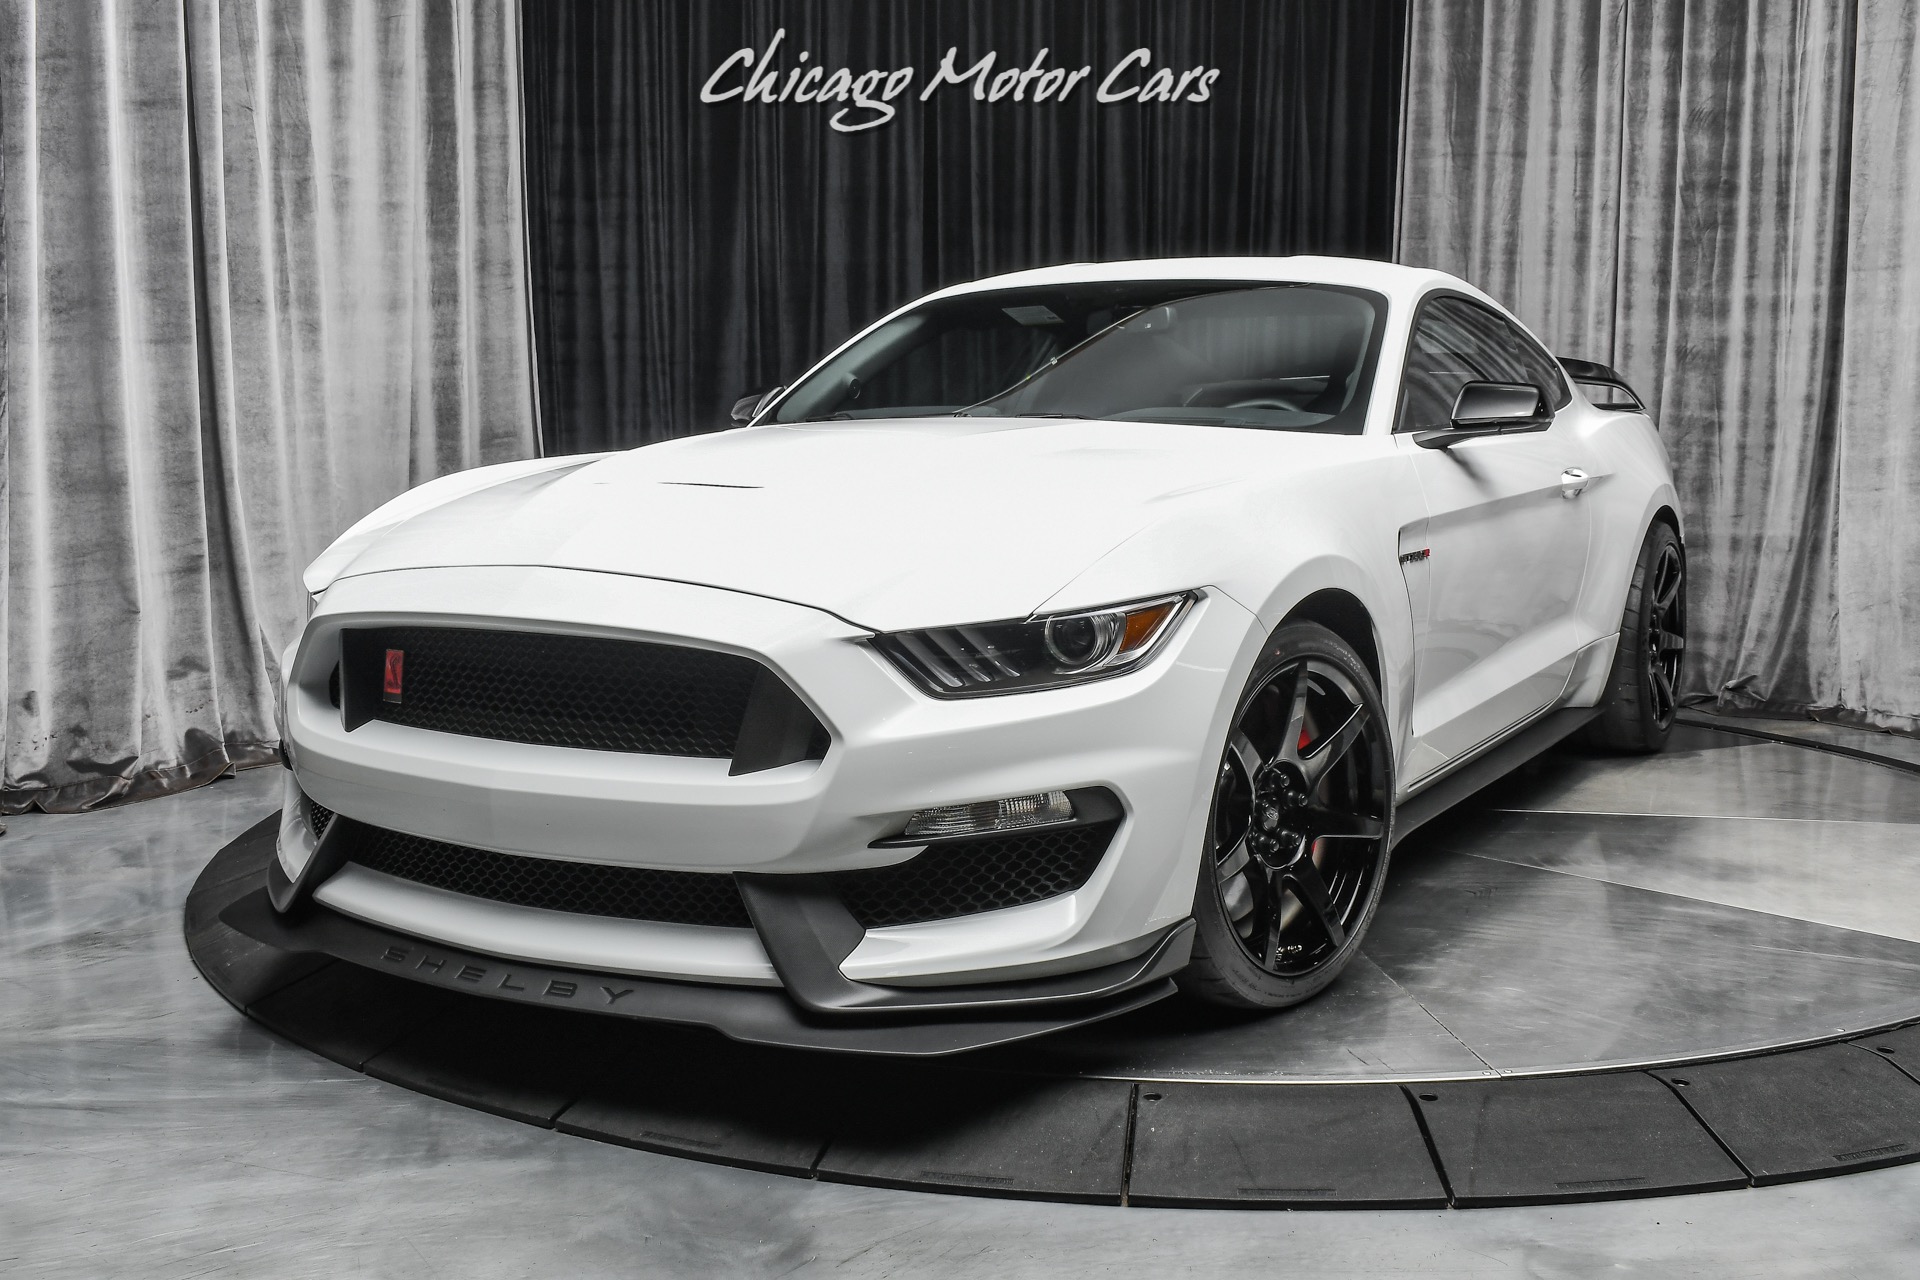 Used-2019-Ford-Mustang-Shelby-GT350R-ONLY-1K-MILES-COMPLETELY-STOCK-STUNNING